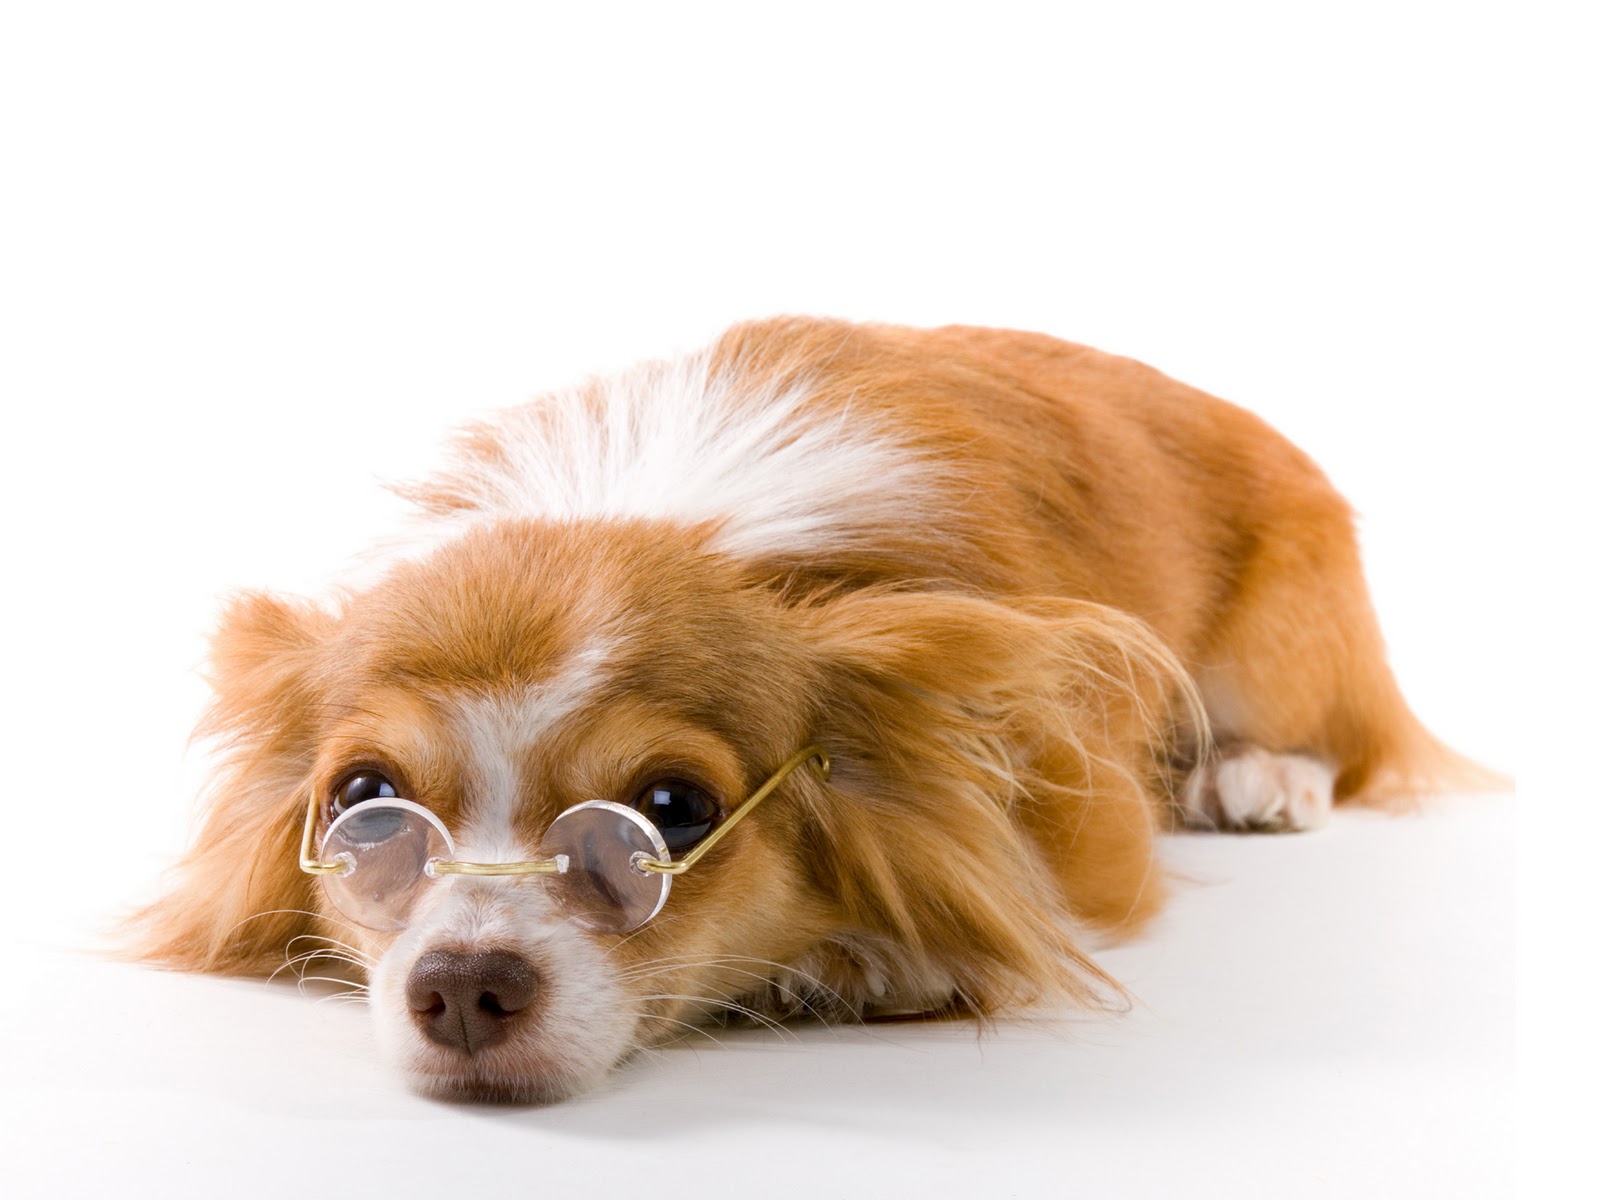 Funny dog picture wearing glasses